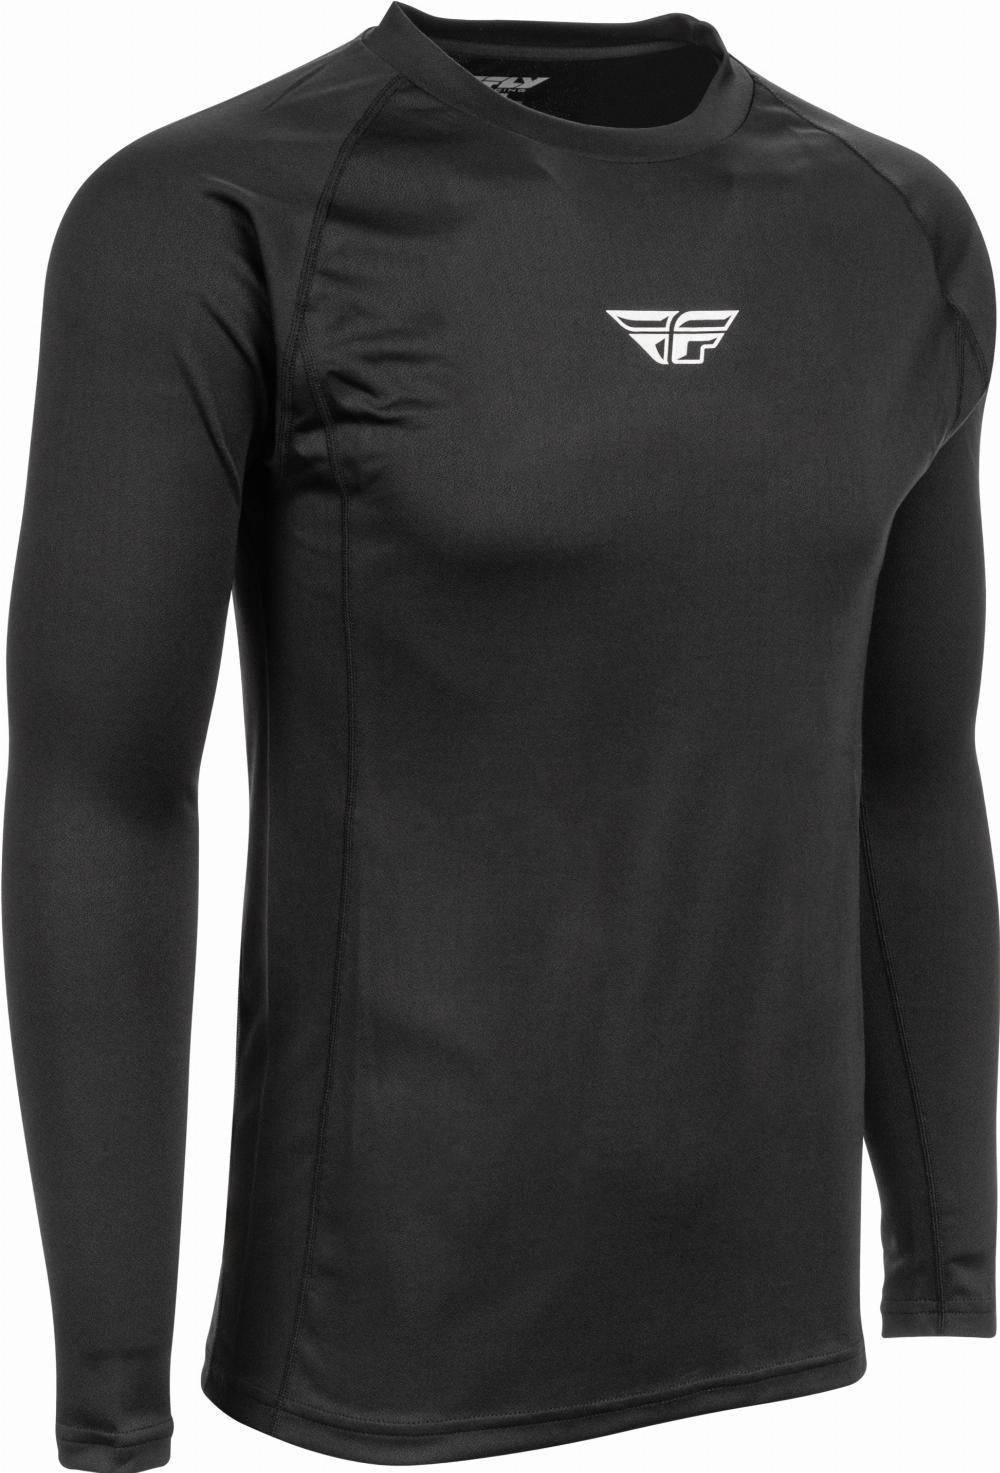 Fly Racing Heavyweight Base Layer Top#mpn_